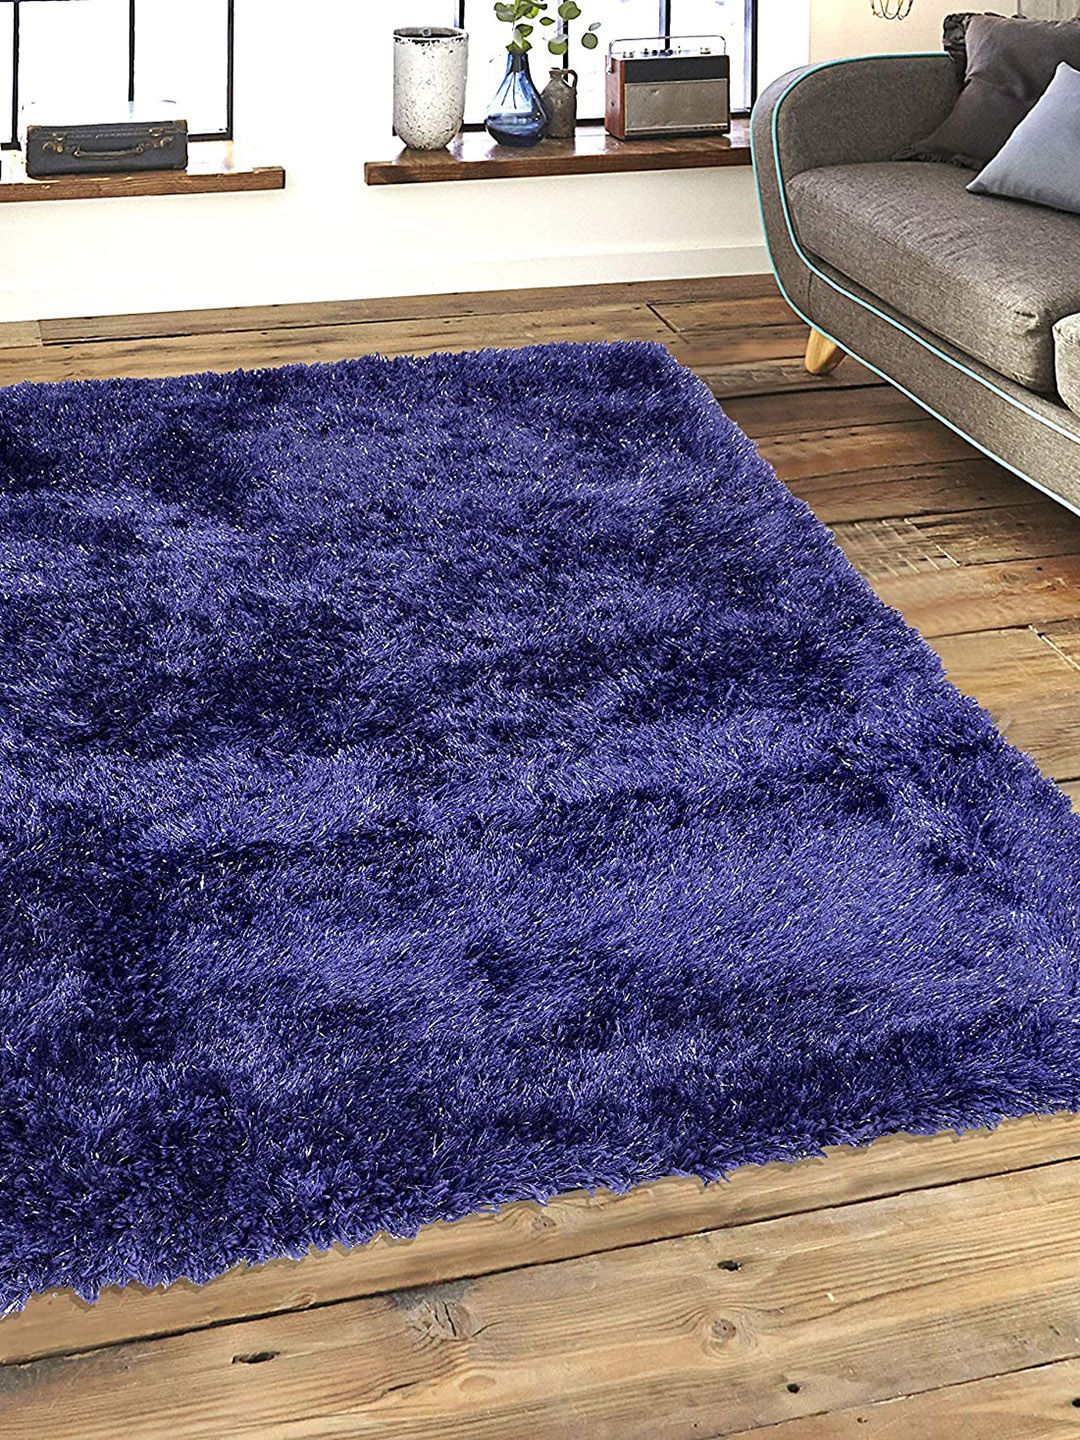 Saral Home Blue Solid Modern Carpet Price in India